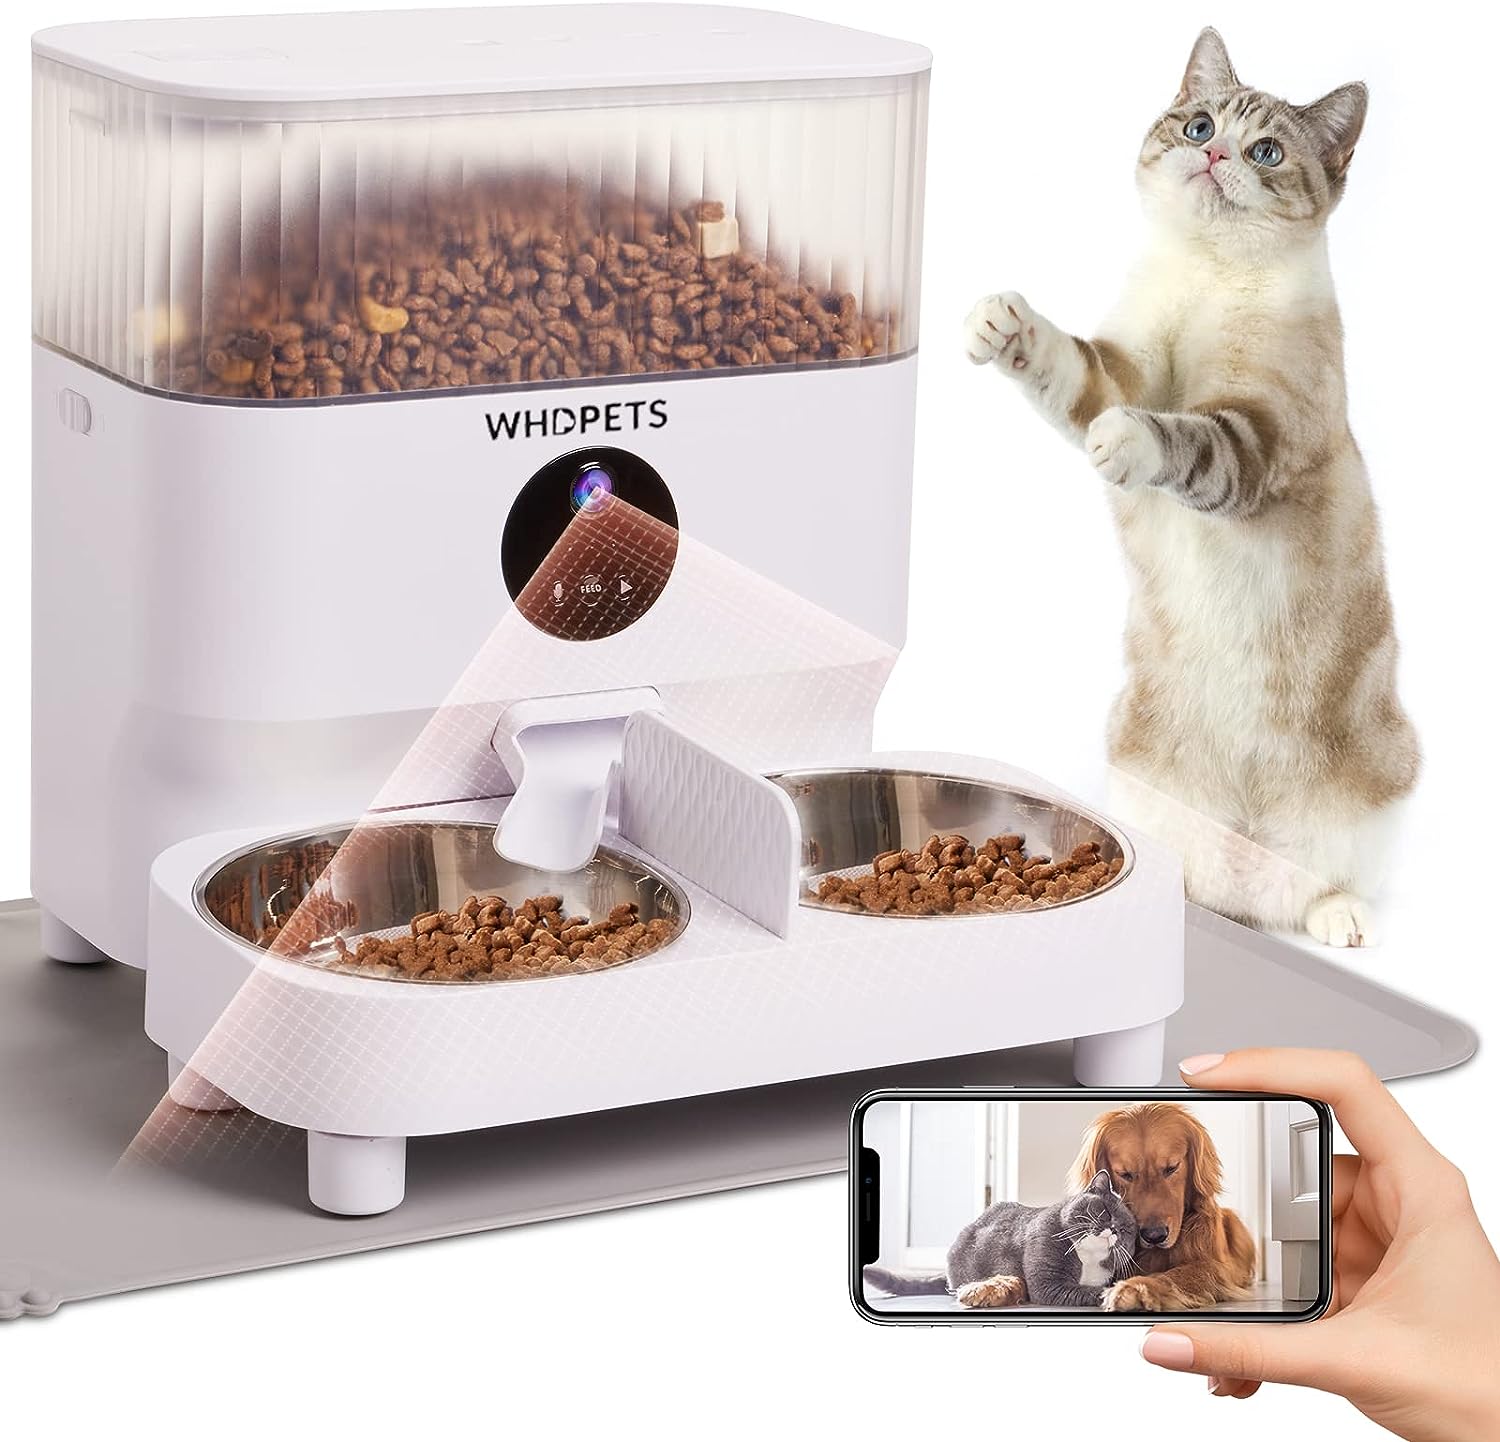 Automatic Cat Feeders, WHDPETS WiFi Cat Food Dispenser with 1080P Camera for 2 Cats  Dogs, 5L Pet Feeder with Feeding Mat, APP Control, 2-Way Audio,Dual Power Supply